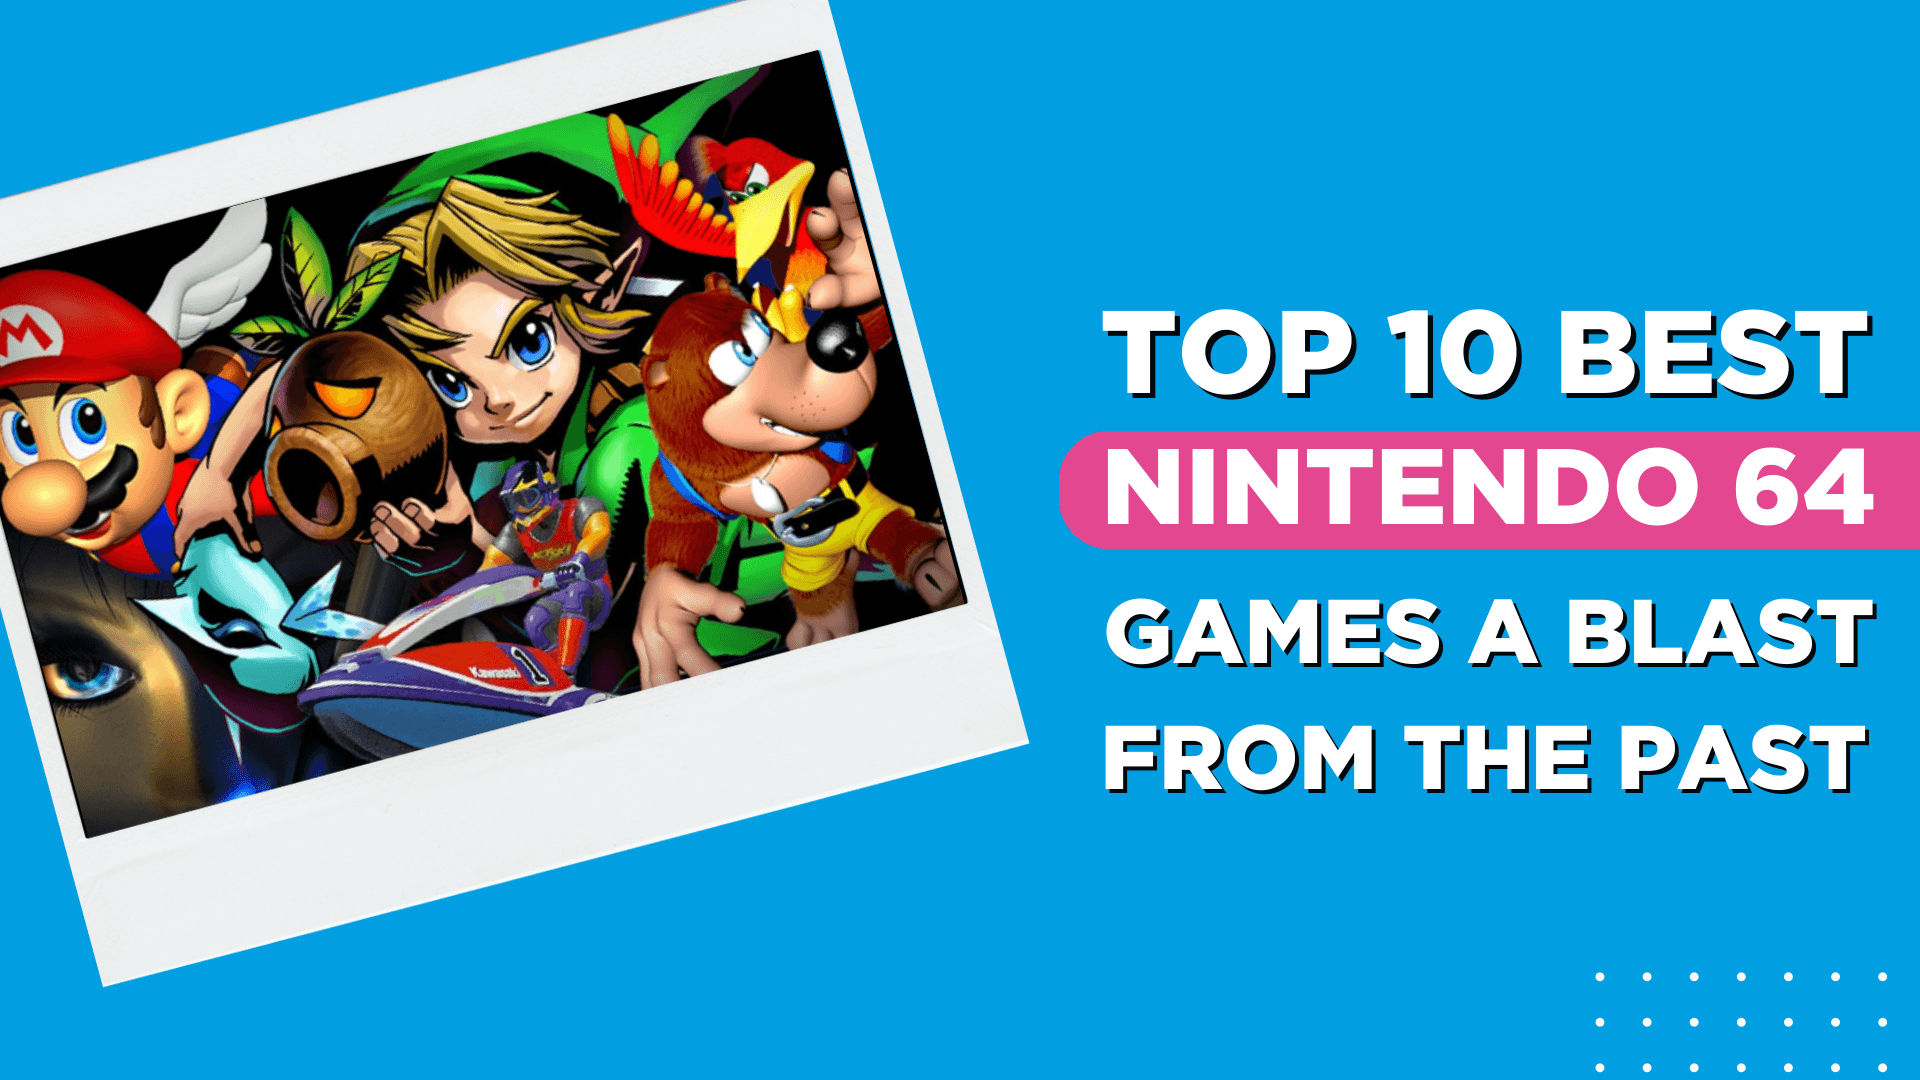 Top 10 best Nintendo 64 games: a blast from the past! - Gamestate